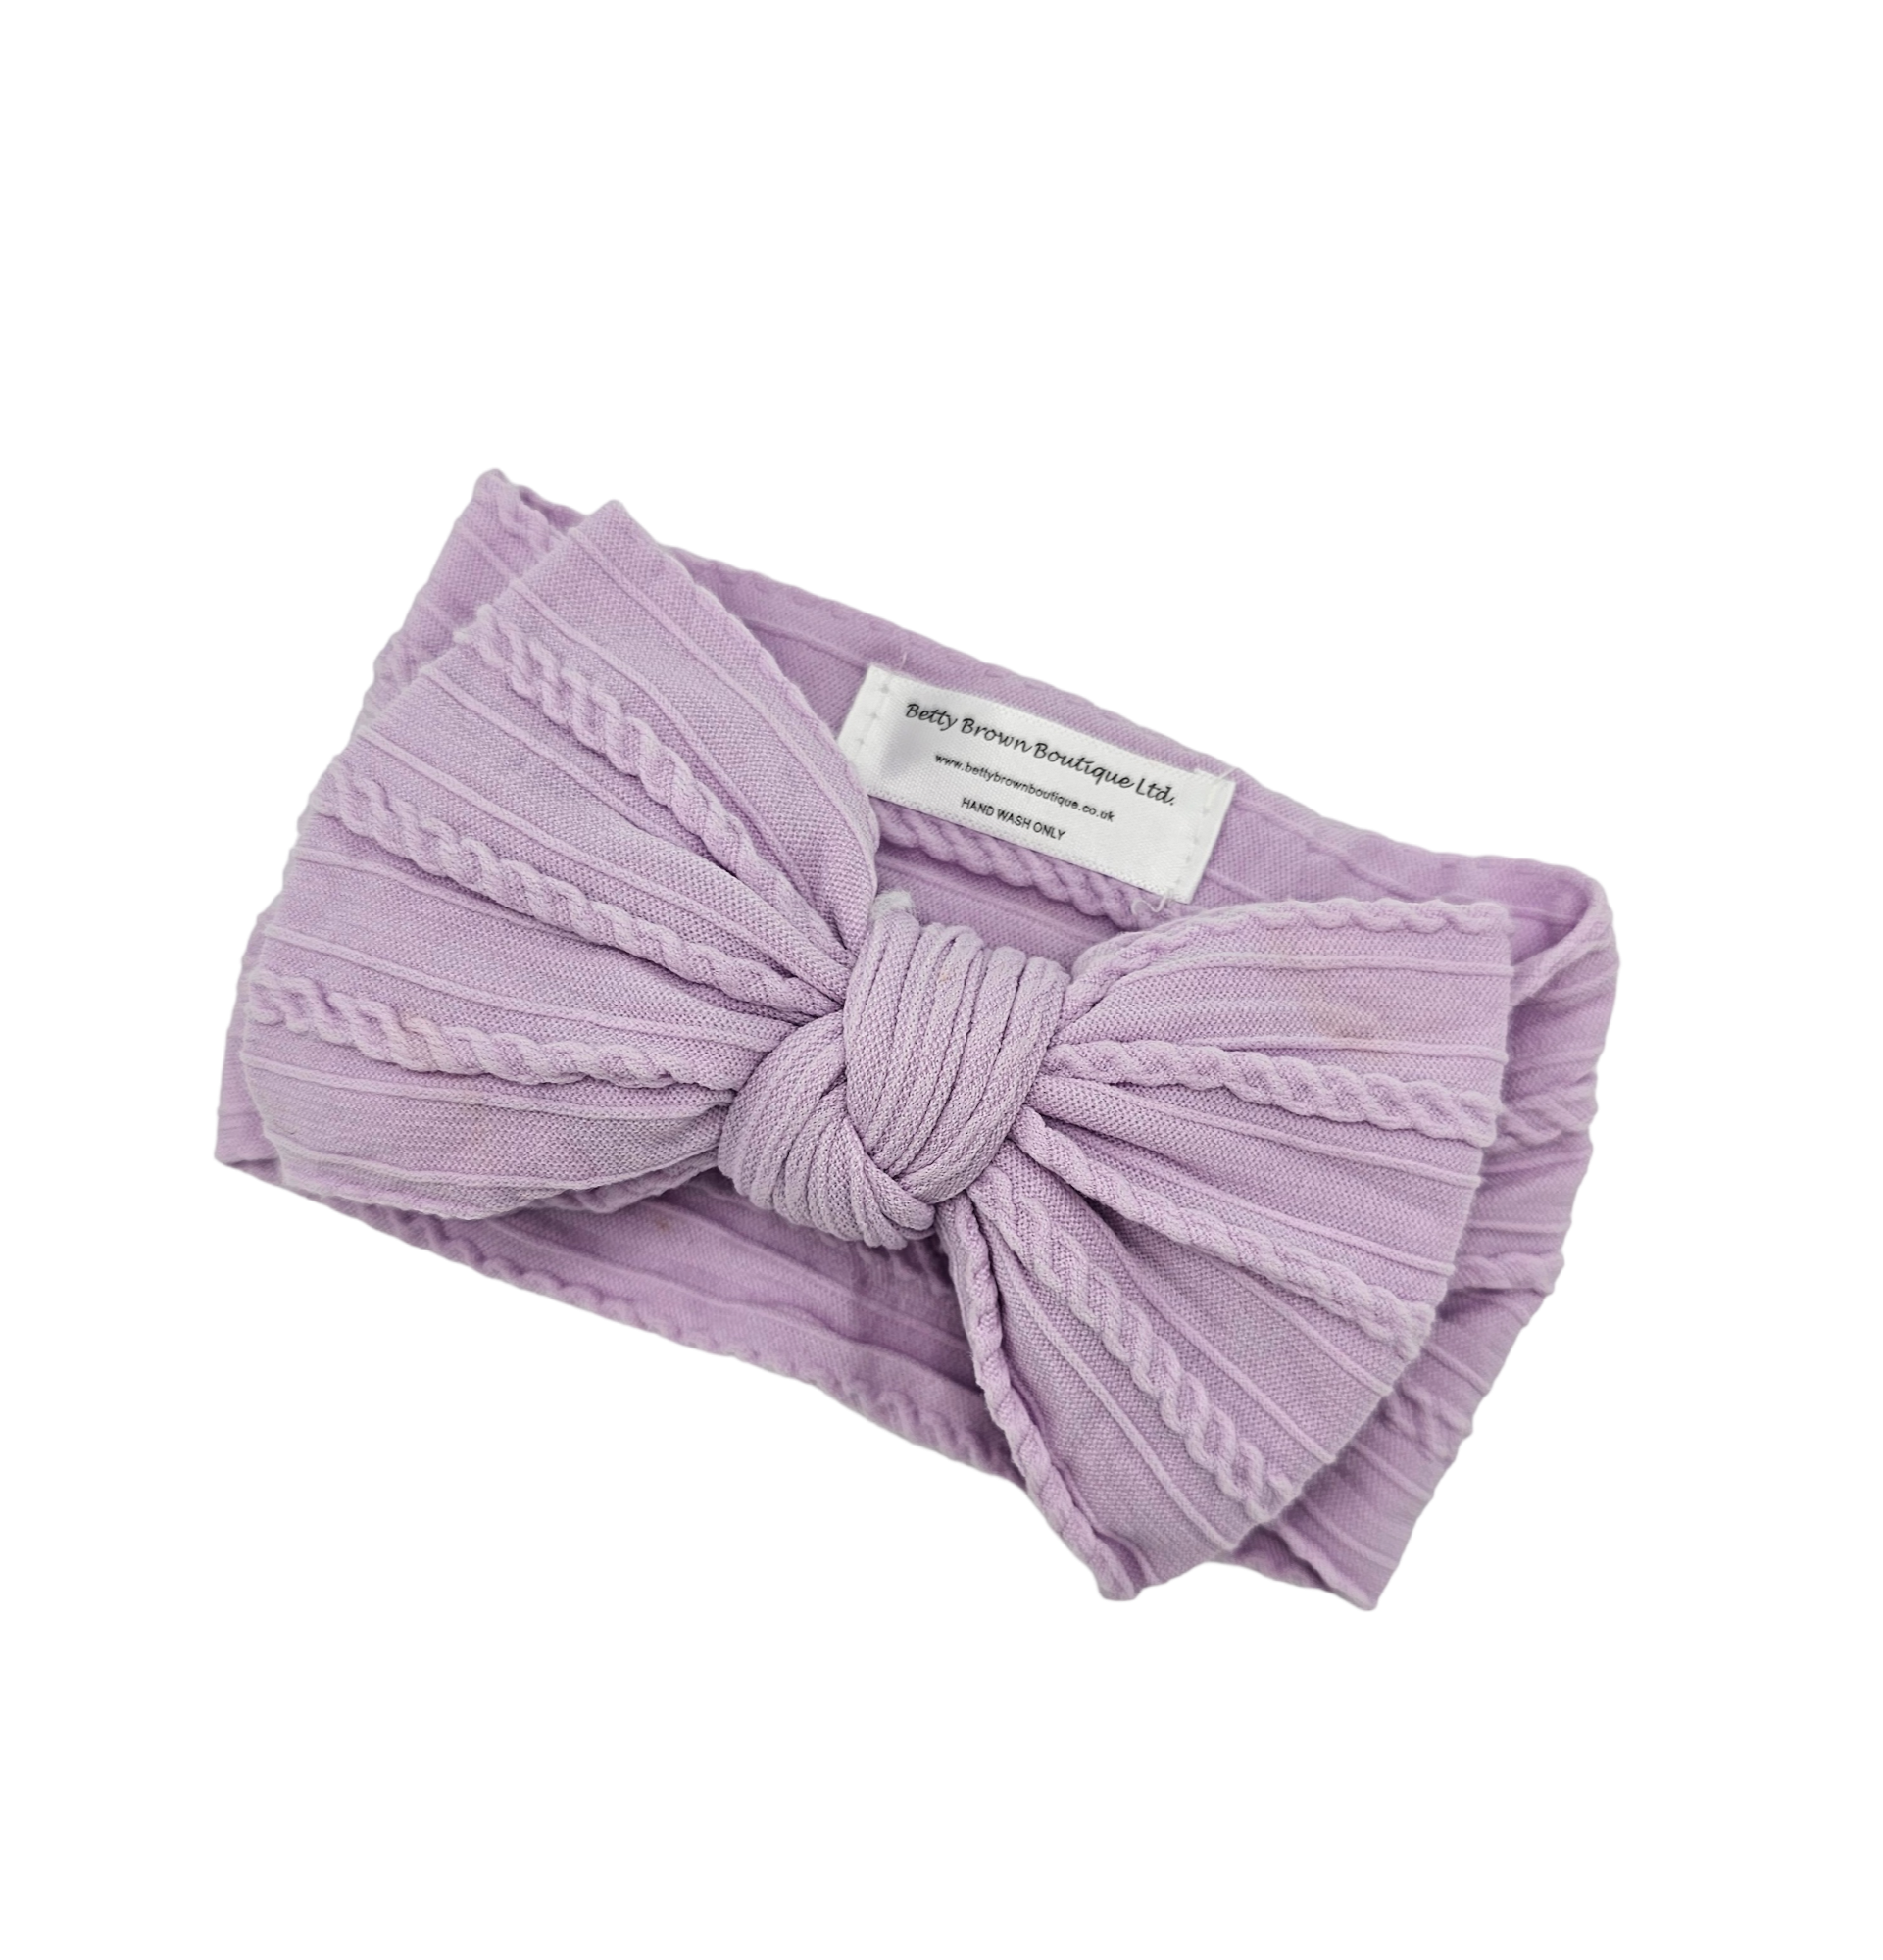 Bright lilac larger Bow Cable Knit headwrap - Betty Brown Boutique Ltd